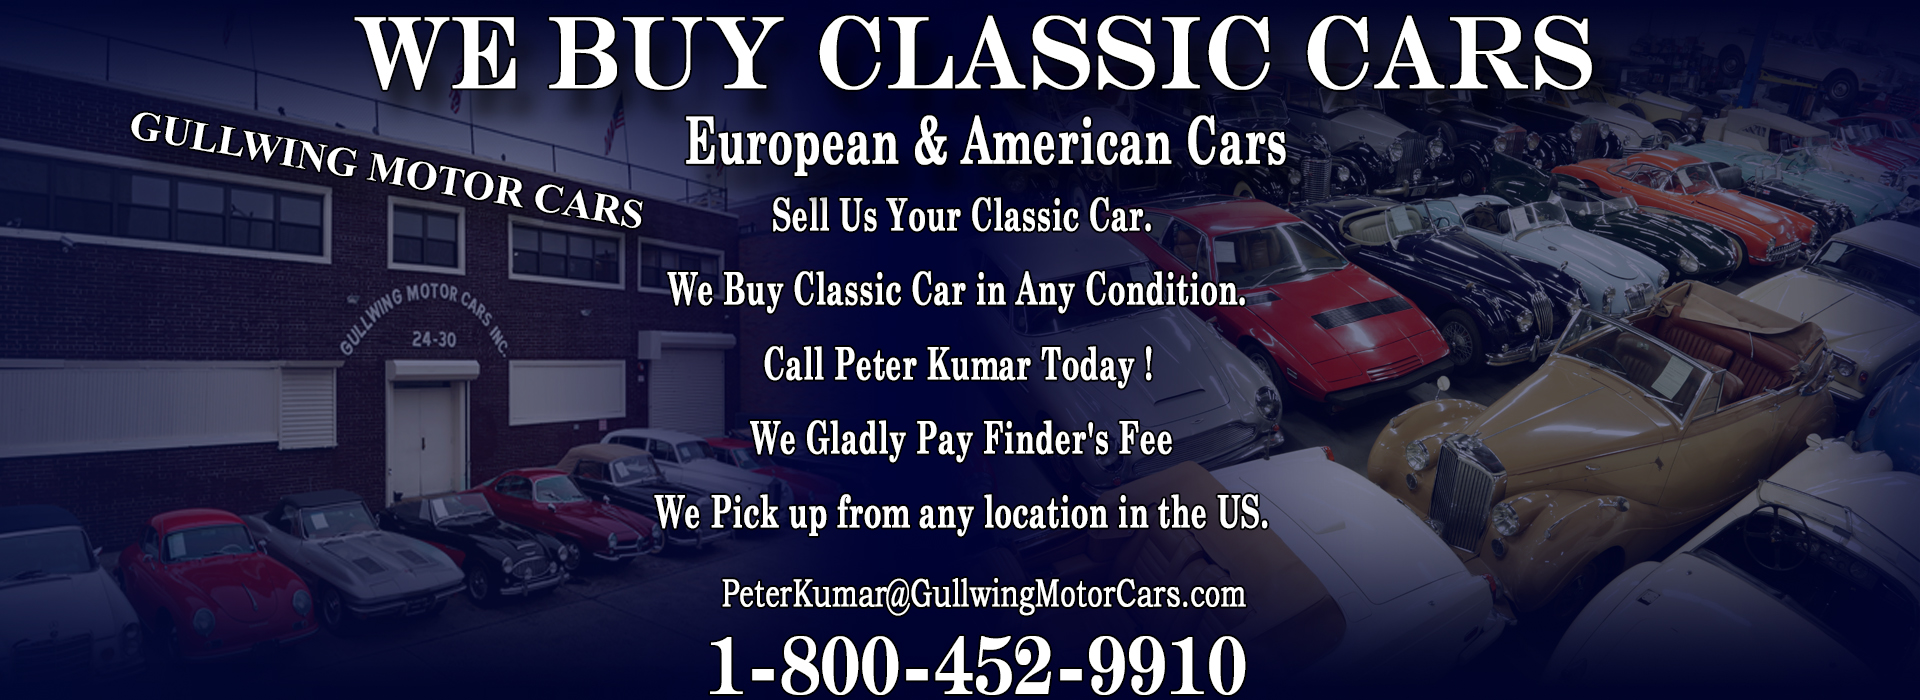 CLASSIC AND ANTIQUE CARS WANTED